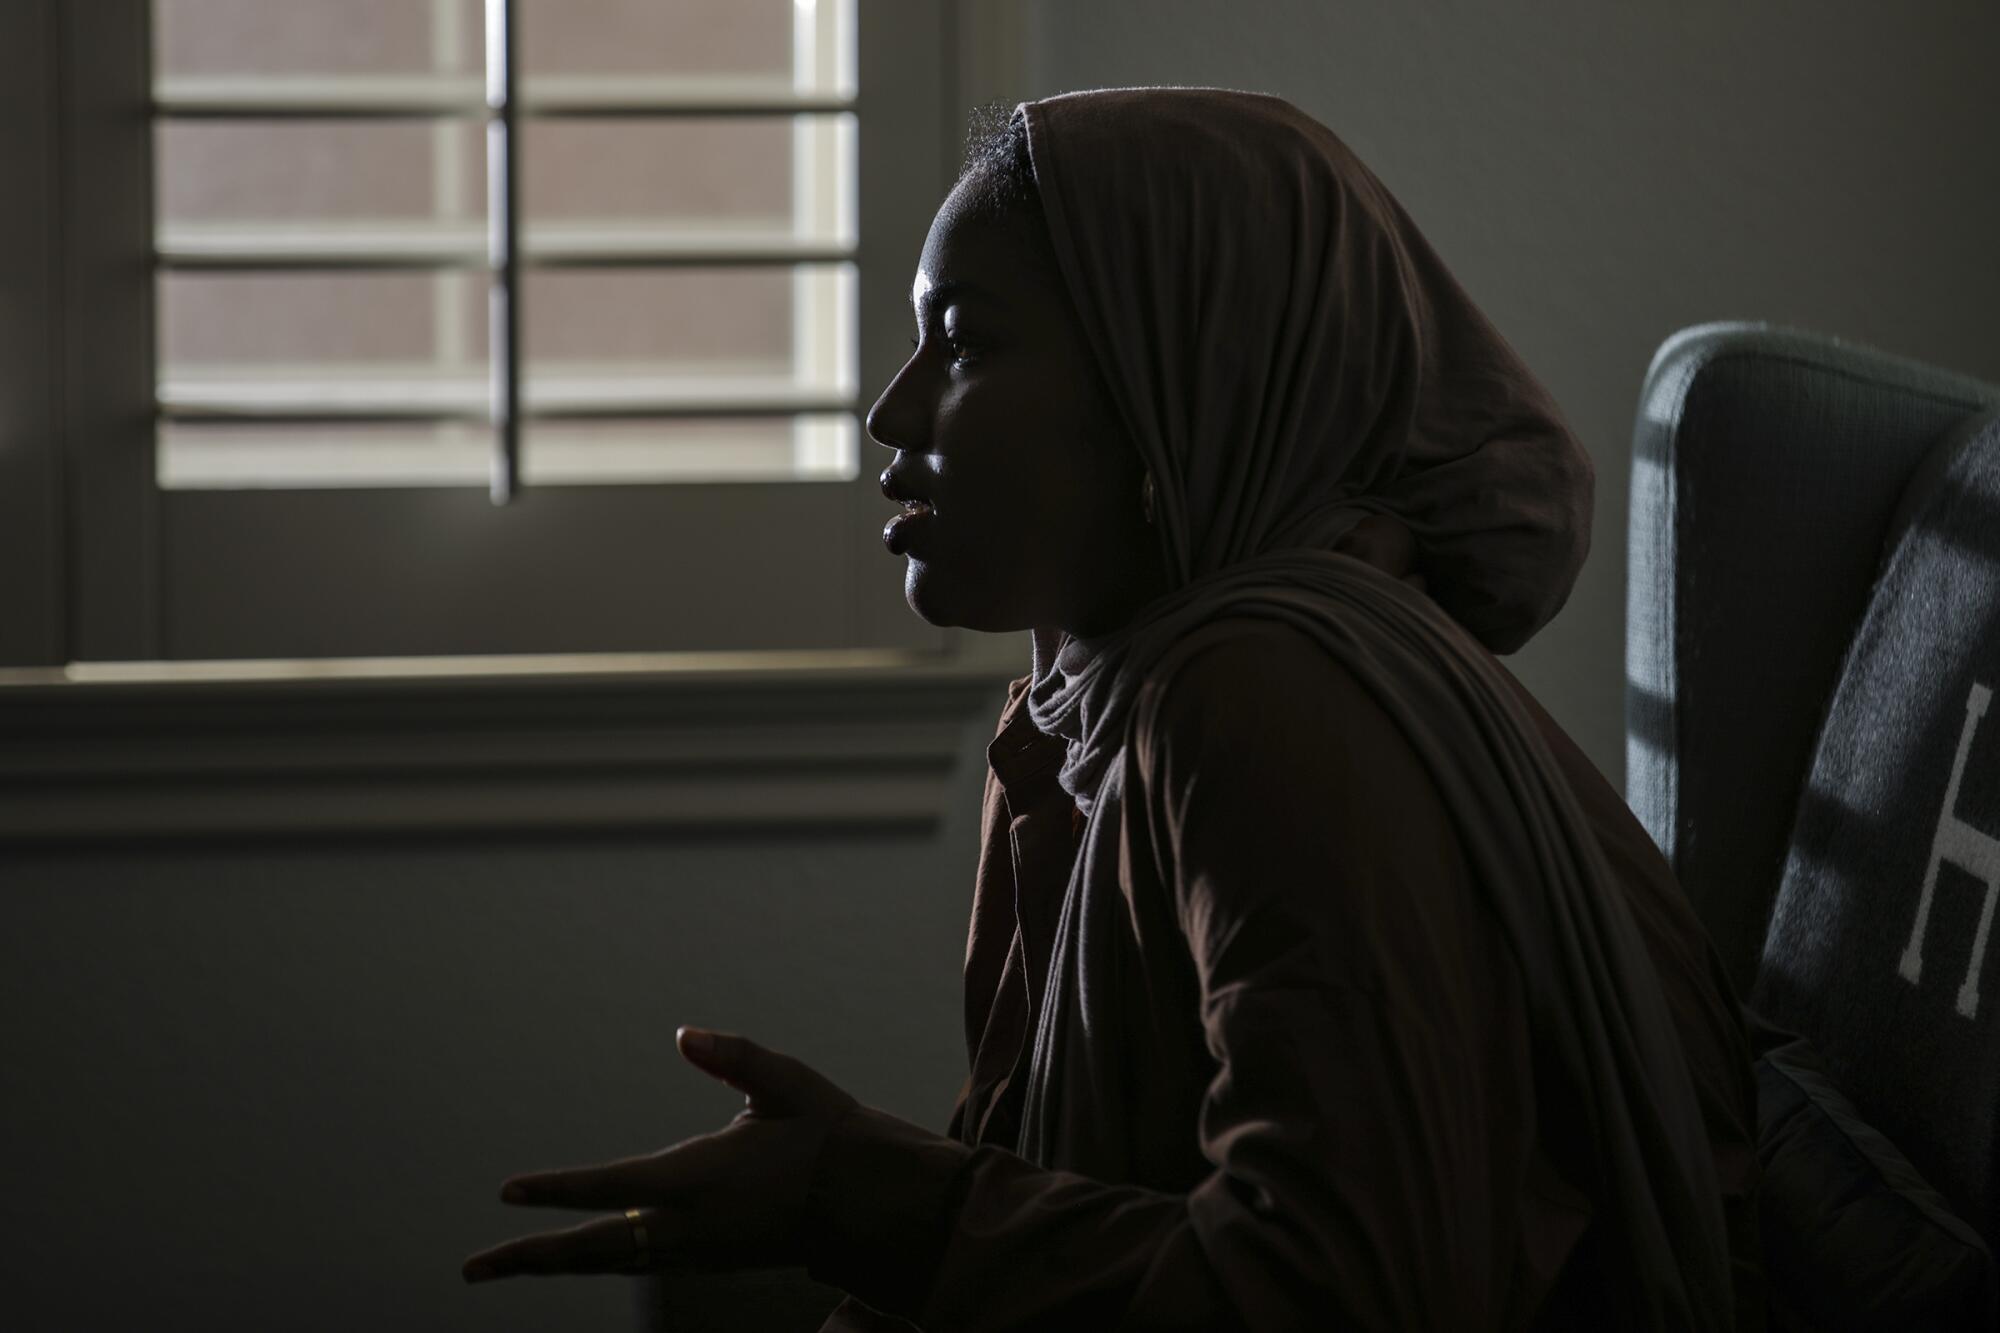 Aissata Ba seen at her home in Aliso Viejo, discusses growing up Muslim in America.